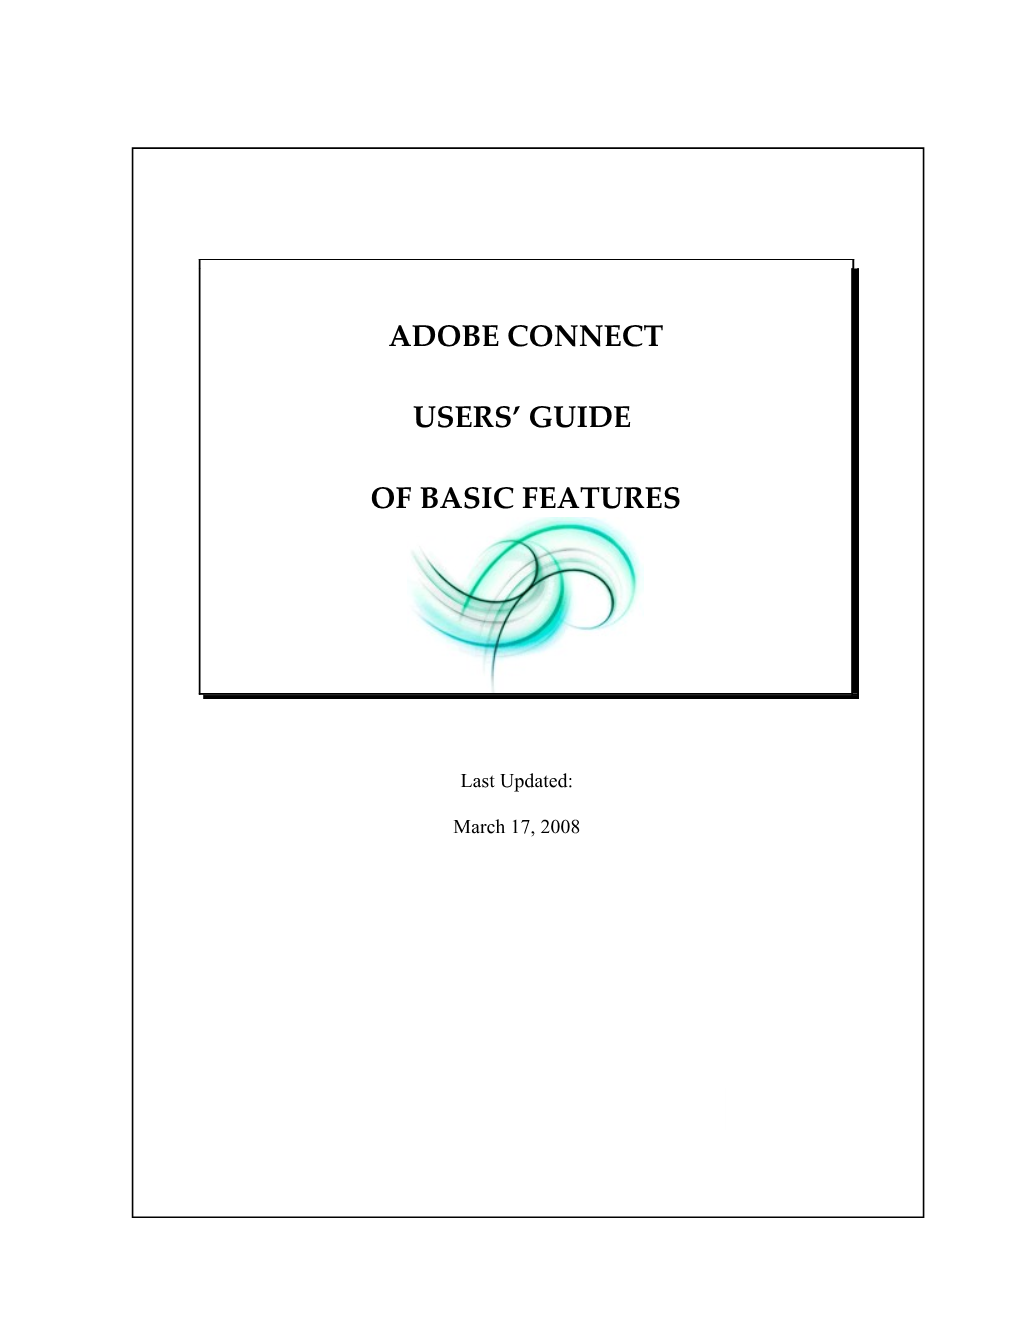 Adobe Connect Users Guide of Basic Features Last Updated: March 17, 2008